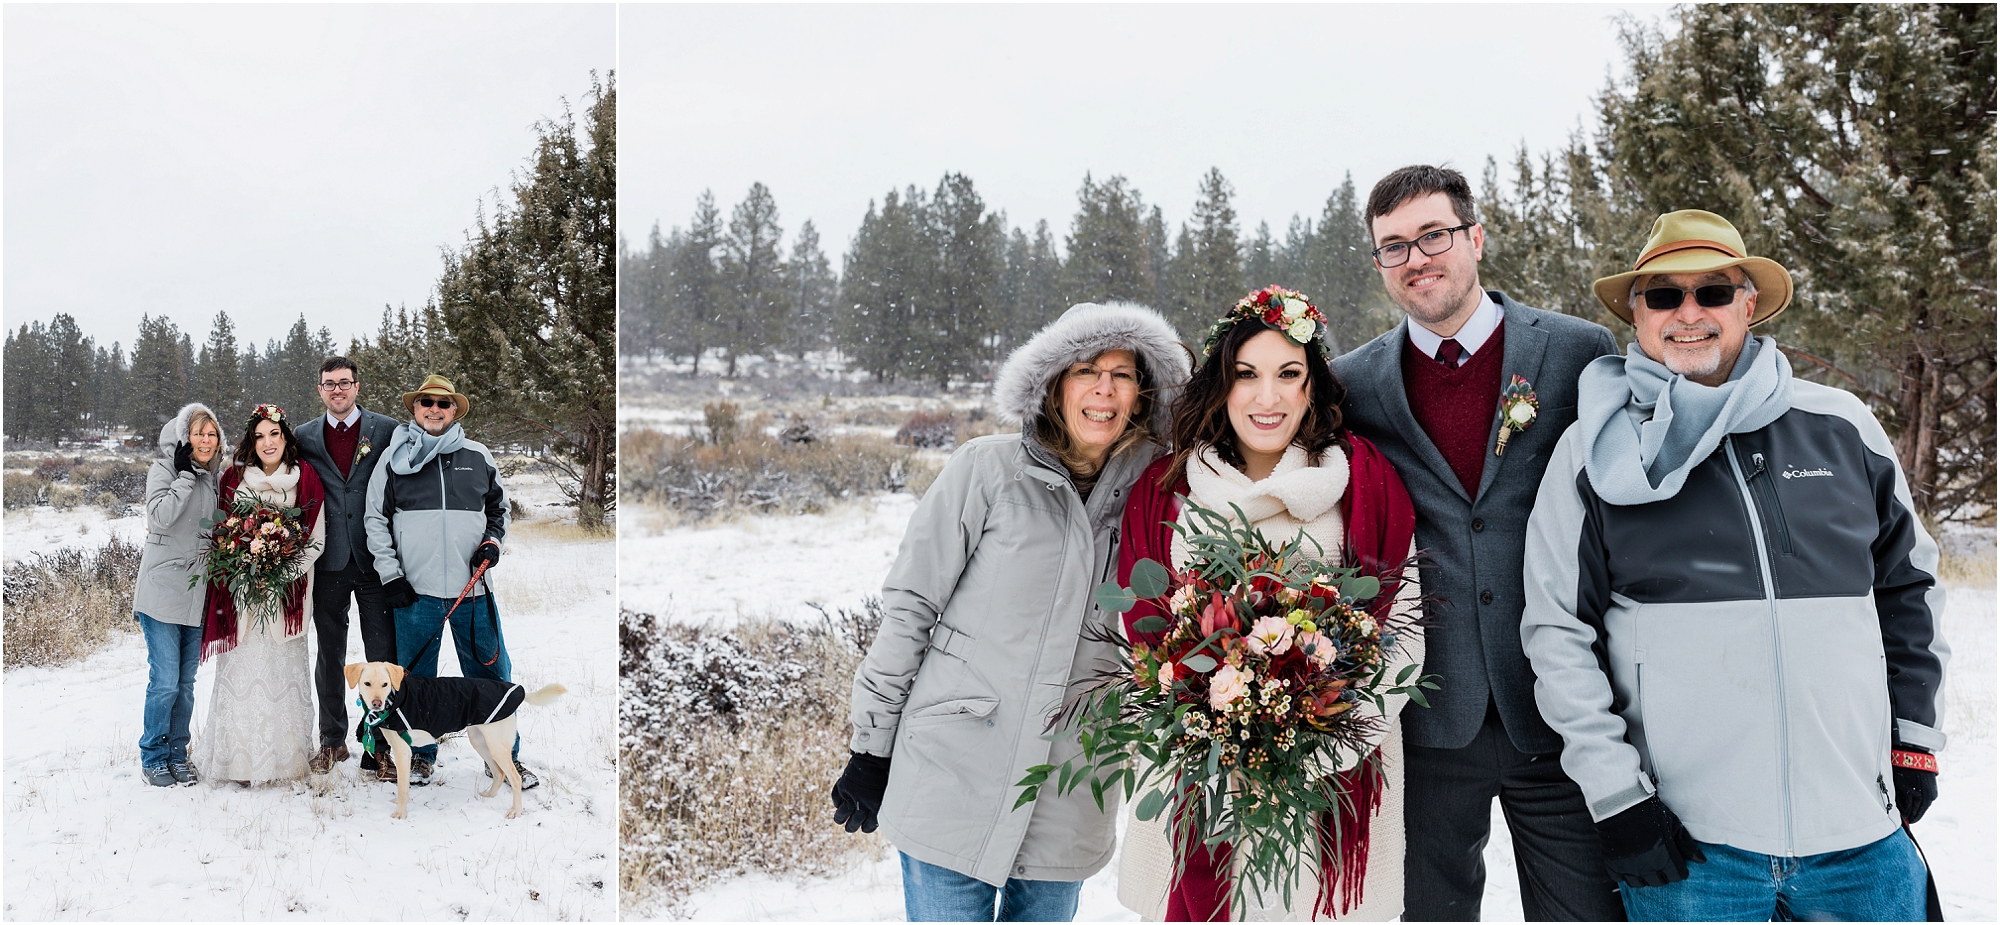 A few family photos after the Central Oregon winter elopement ceremony near Five Pine Lodge in Sisters, OR. | Erica Swantek Photography